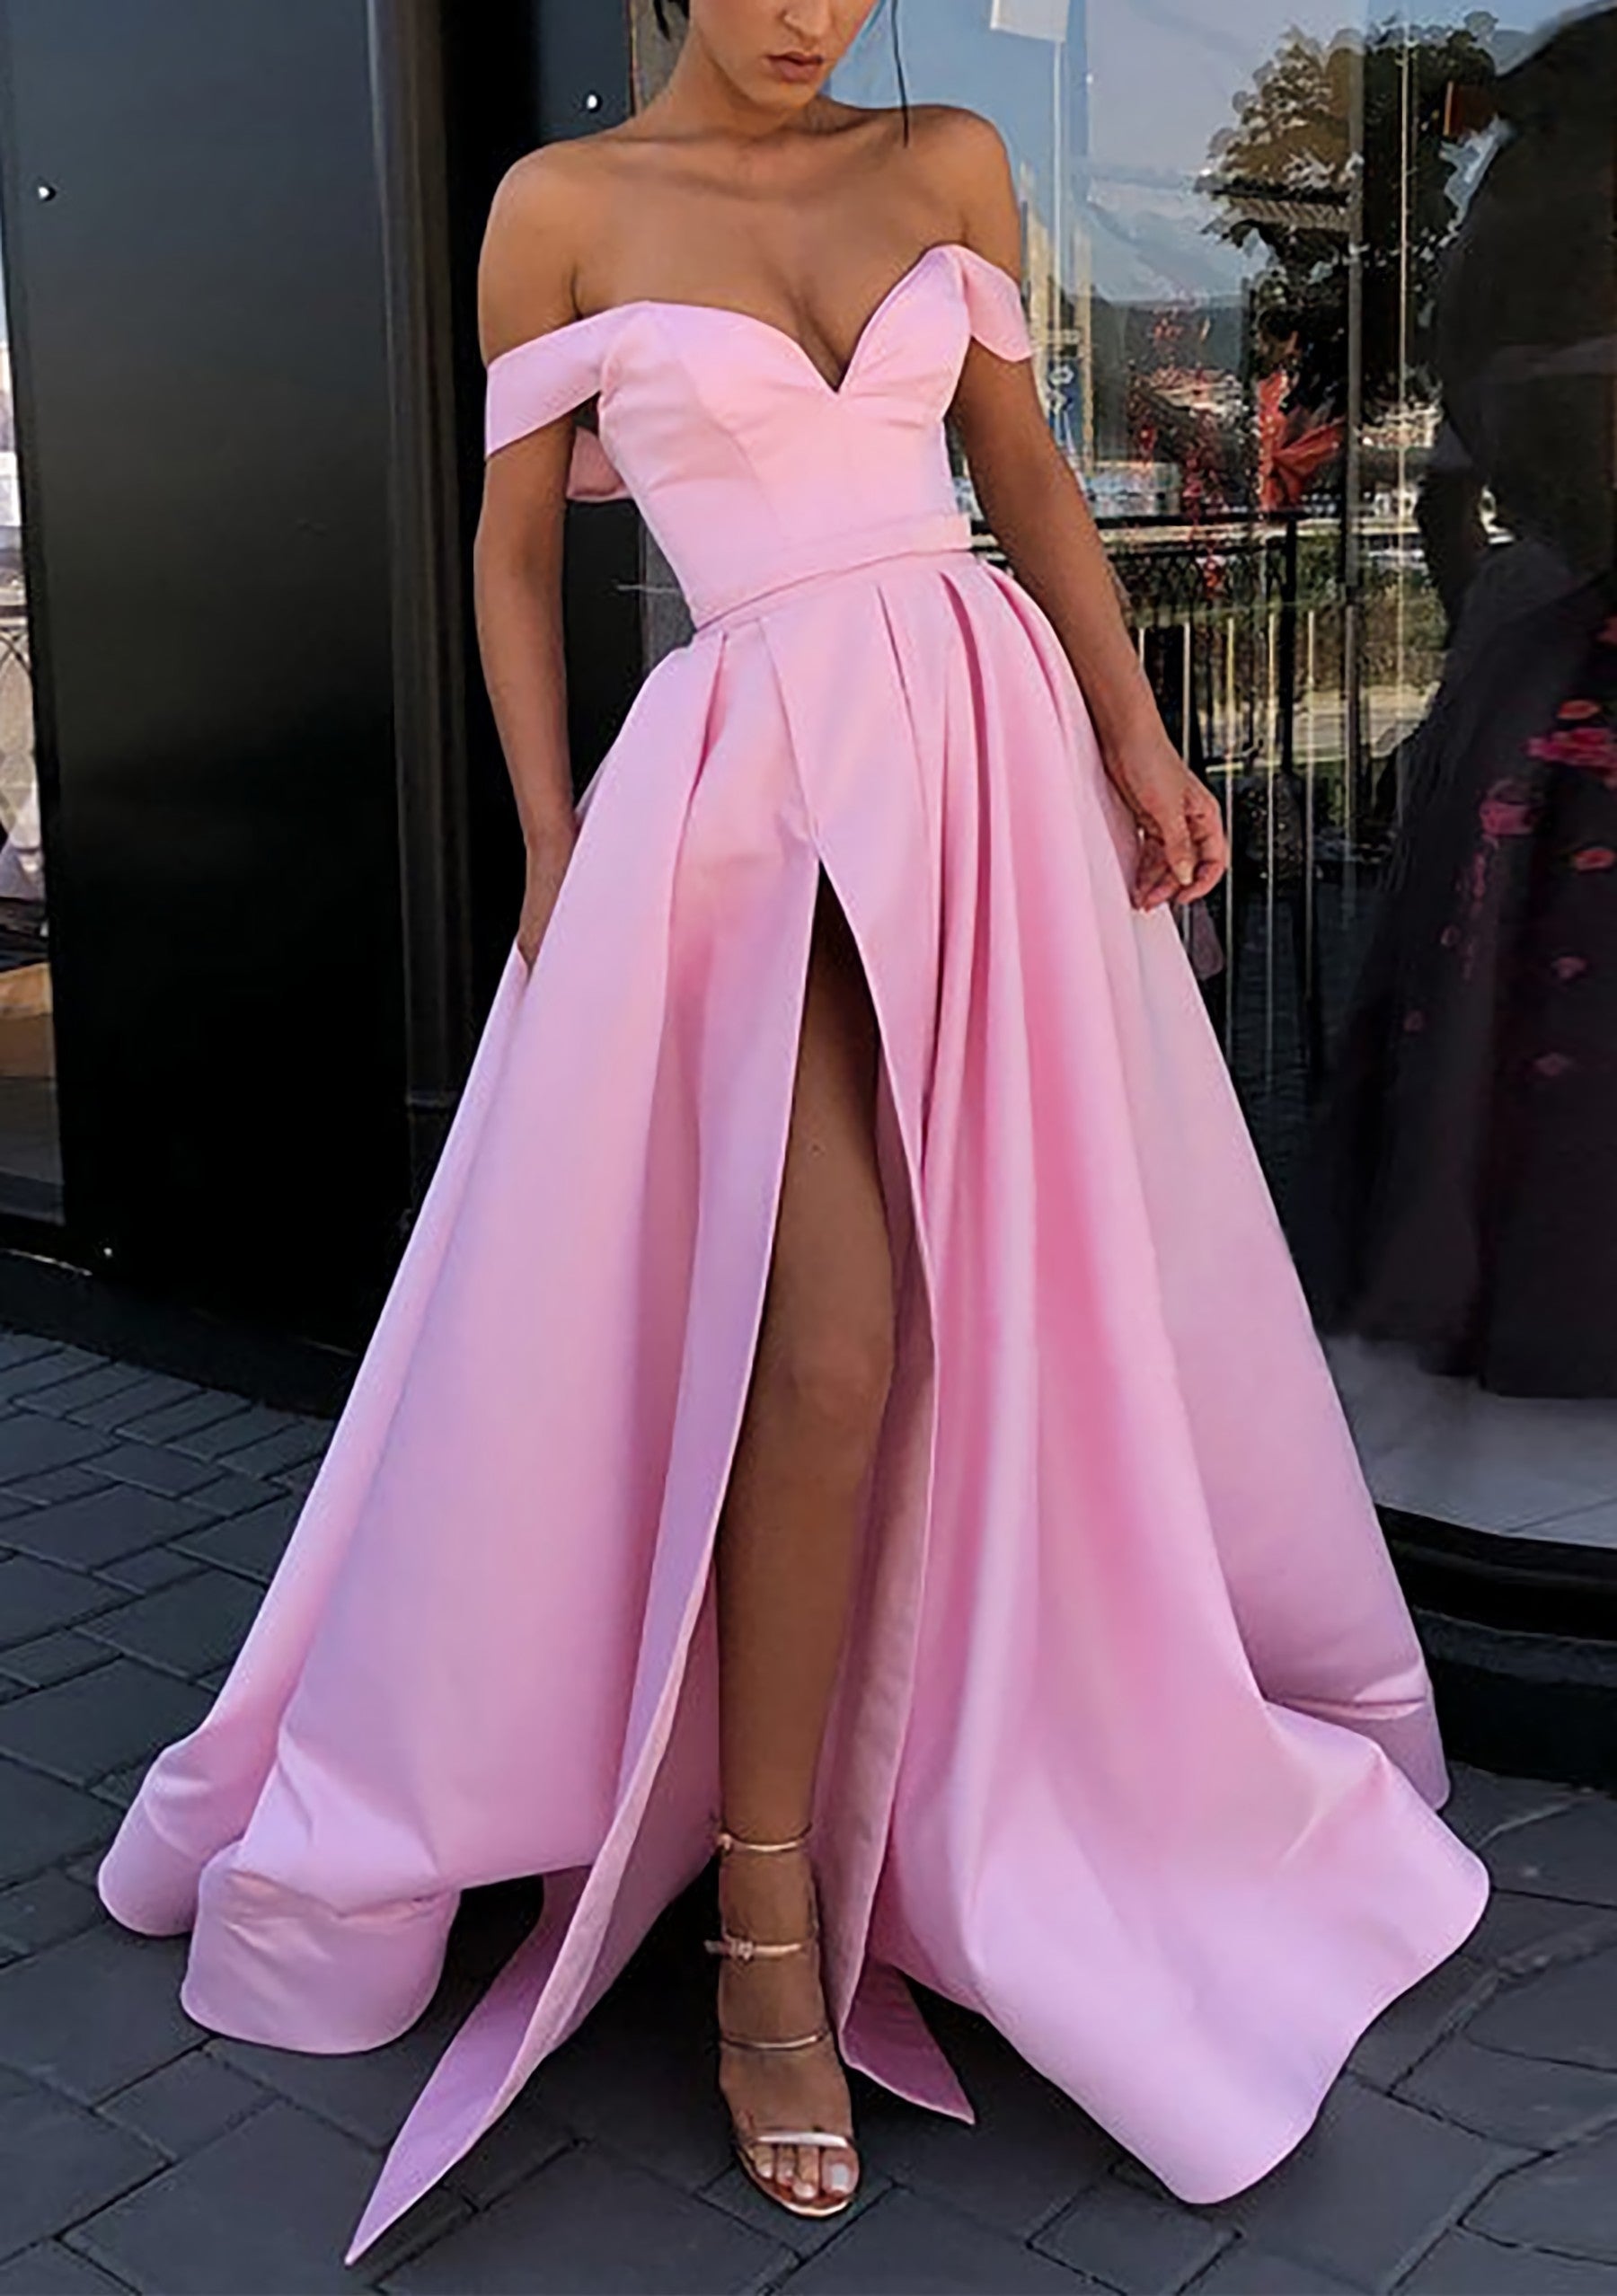 A-line Off-the-Shoulder Strapless Long/Floor-Length Satin Corset Prom Dress With Split outfit, Black Tie Dress